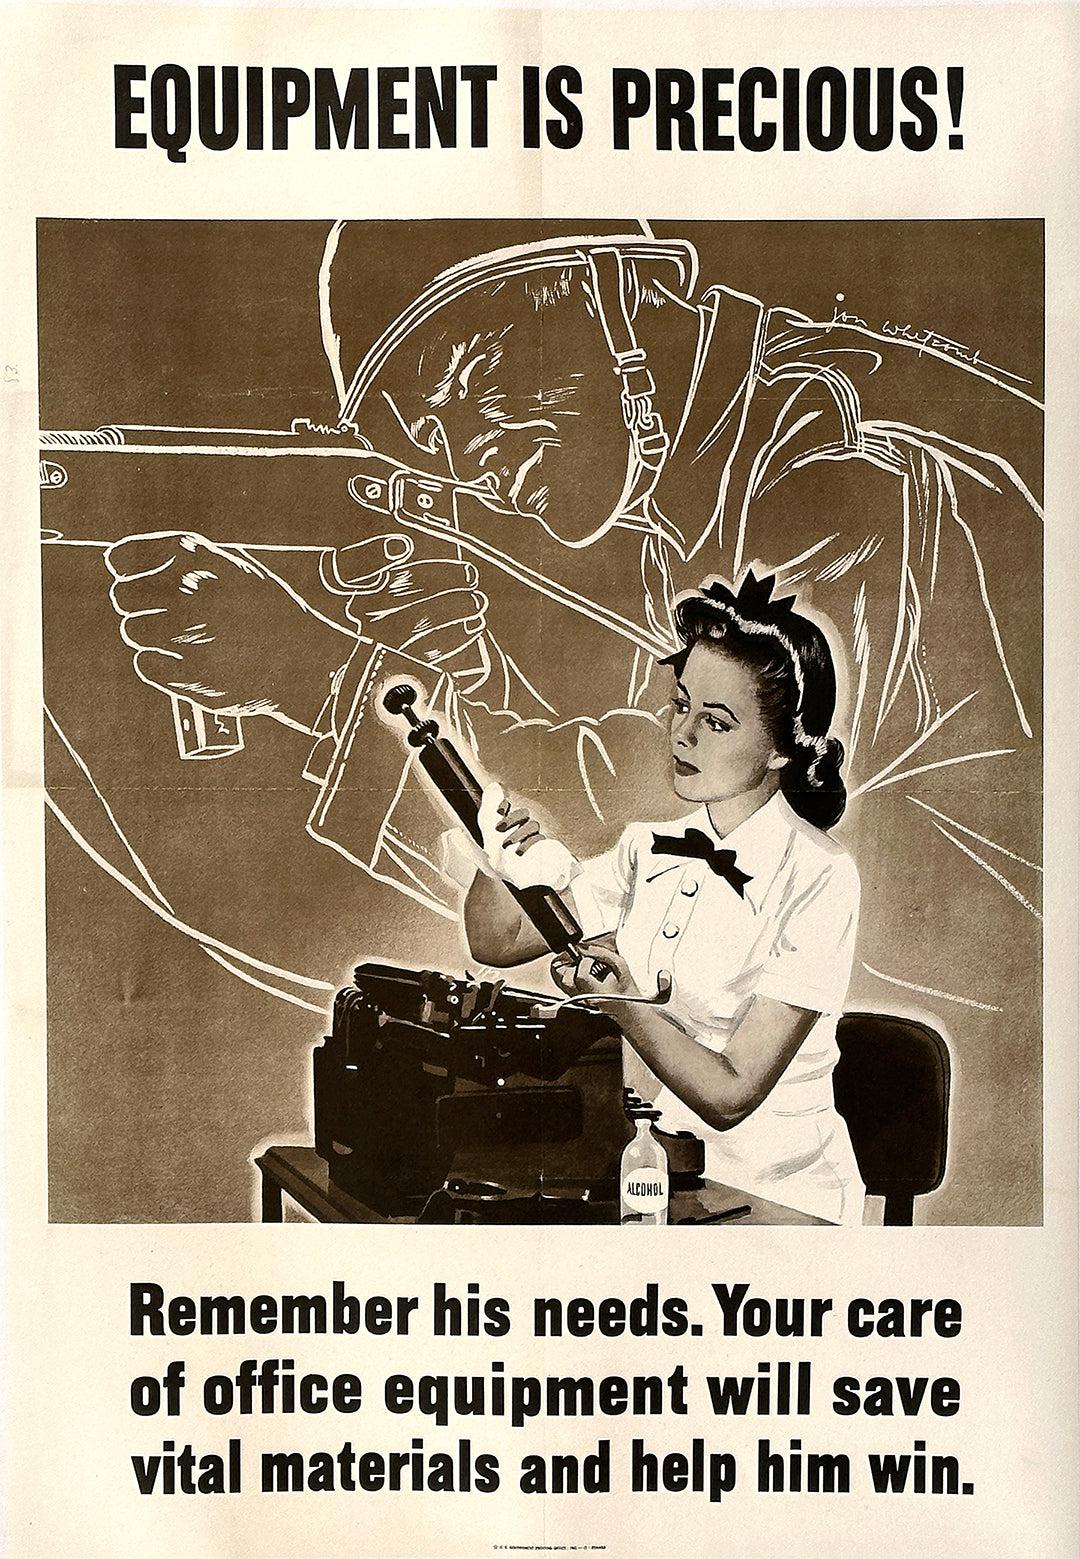 Original Vintage WWII Poster Equipment is Precious by Whitcomb Women in the War 1943